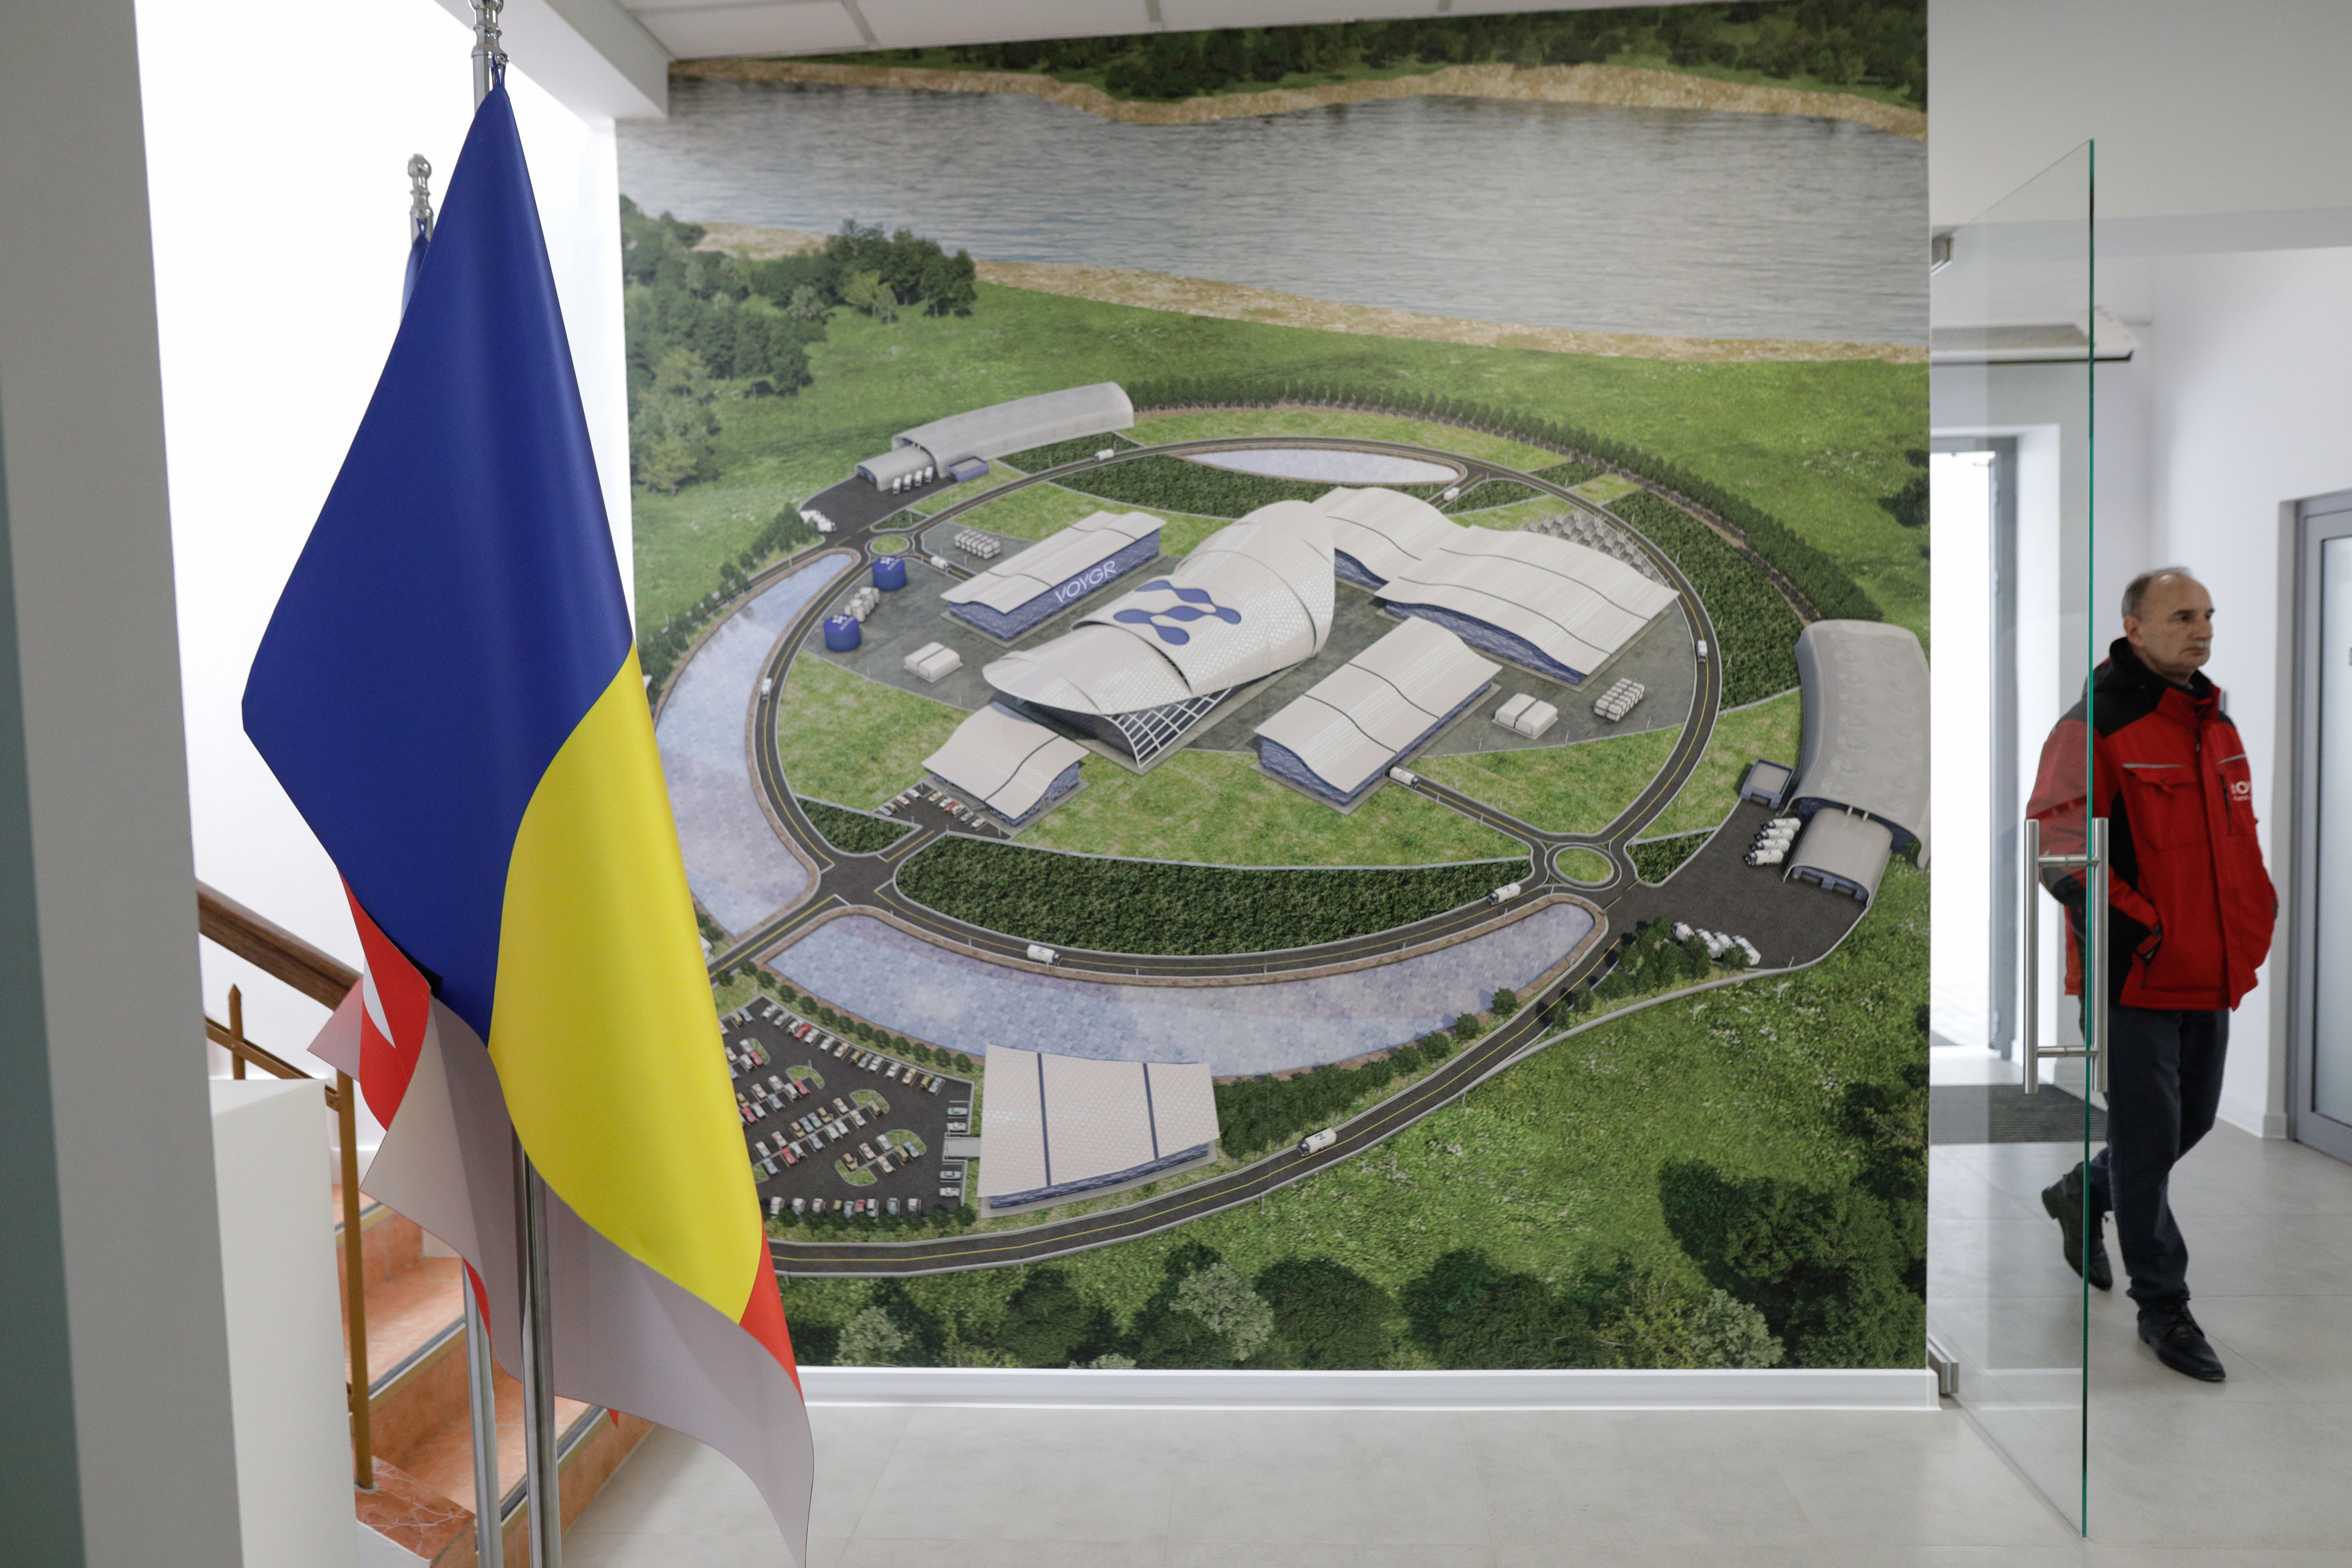 Romania to build six small modular nuclear reactors near Bucharest with US financing